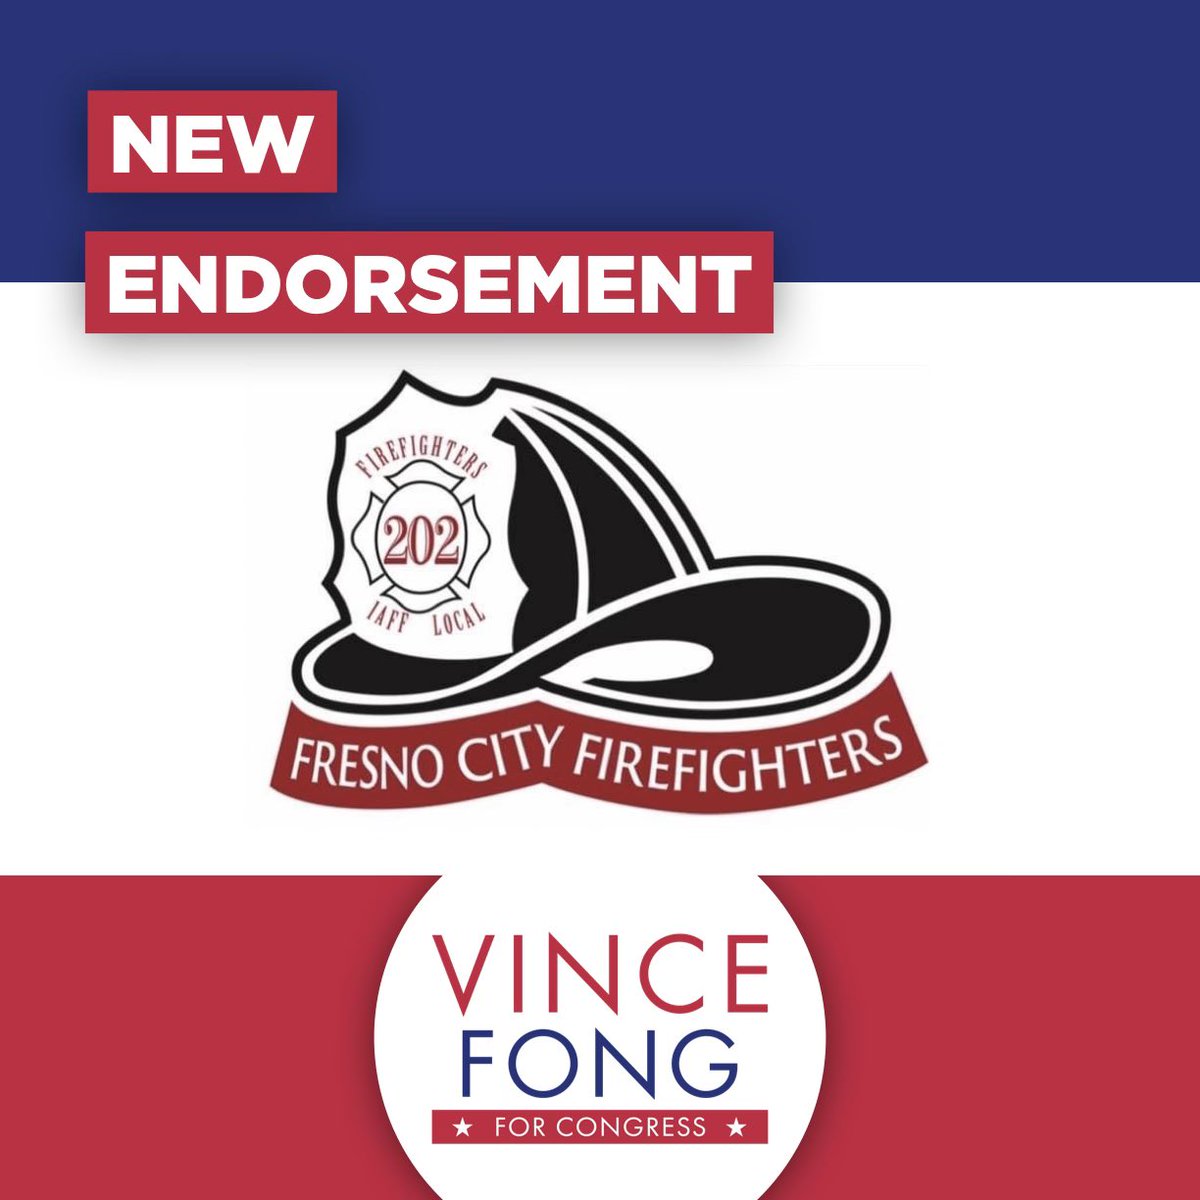 Thank you to the Fresno City Firefighters Association for their support and endorsement of our congressional campaign! #ca20 #vincefongforcongress